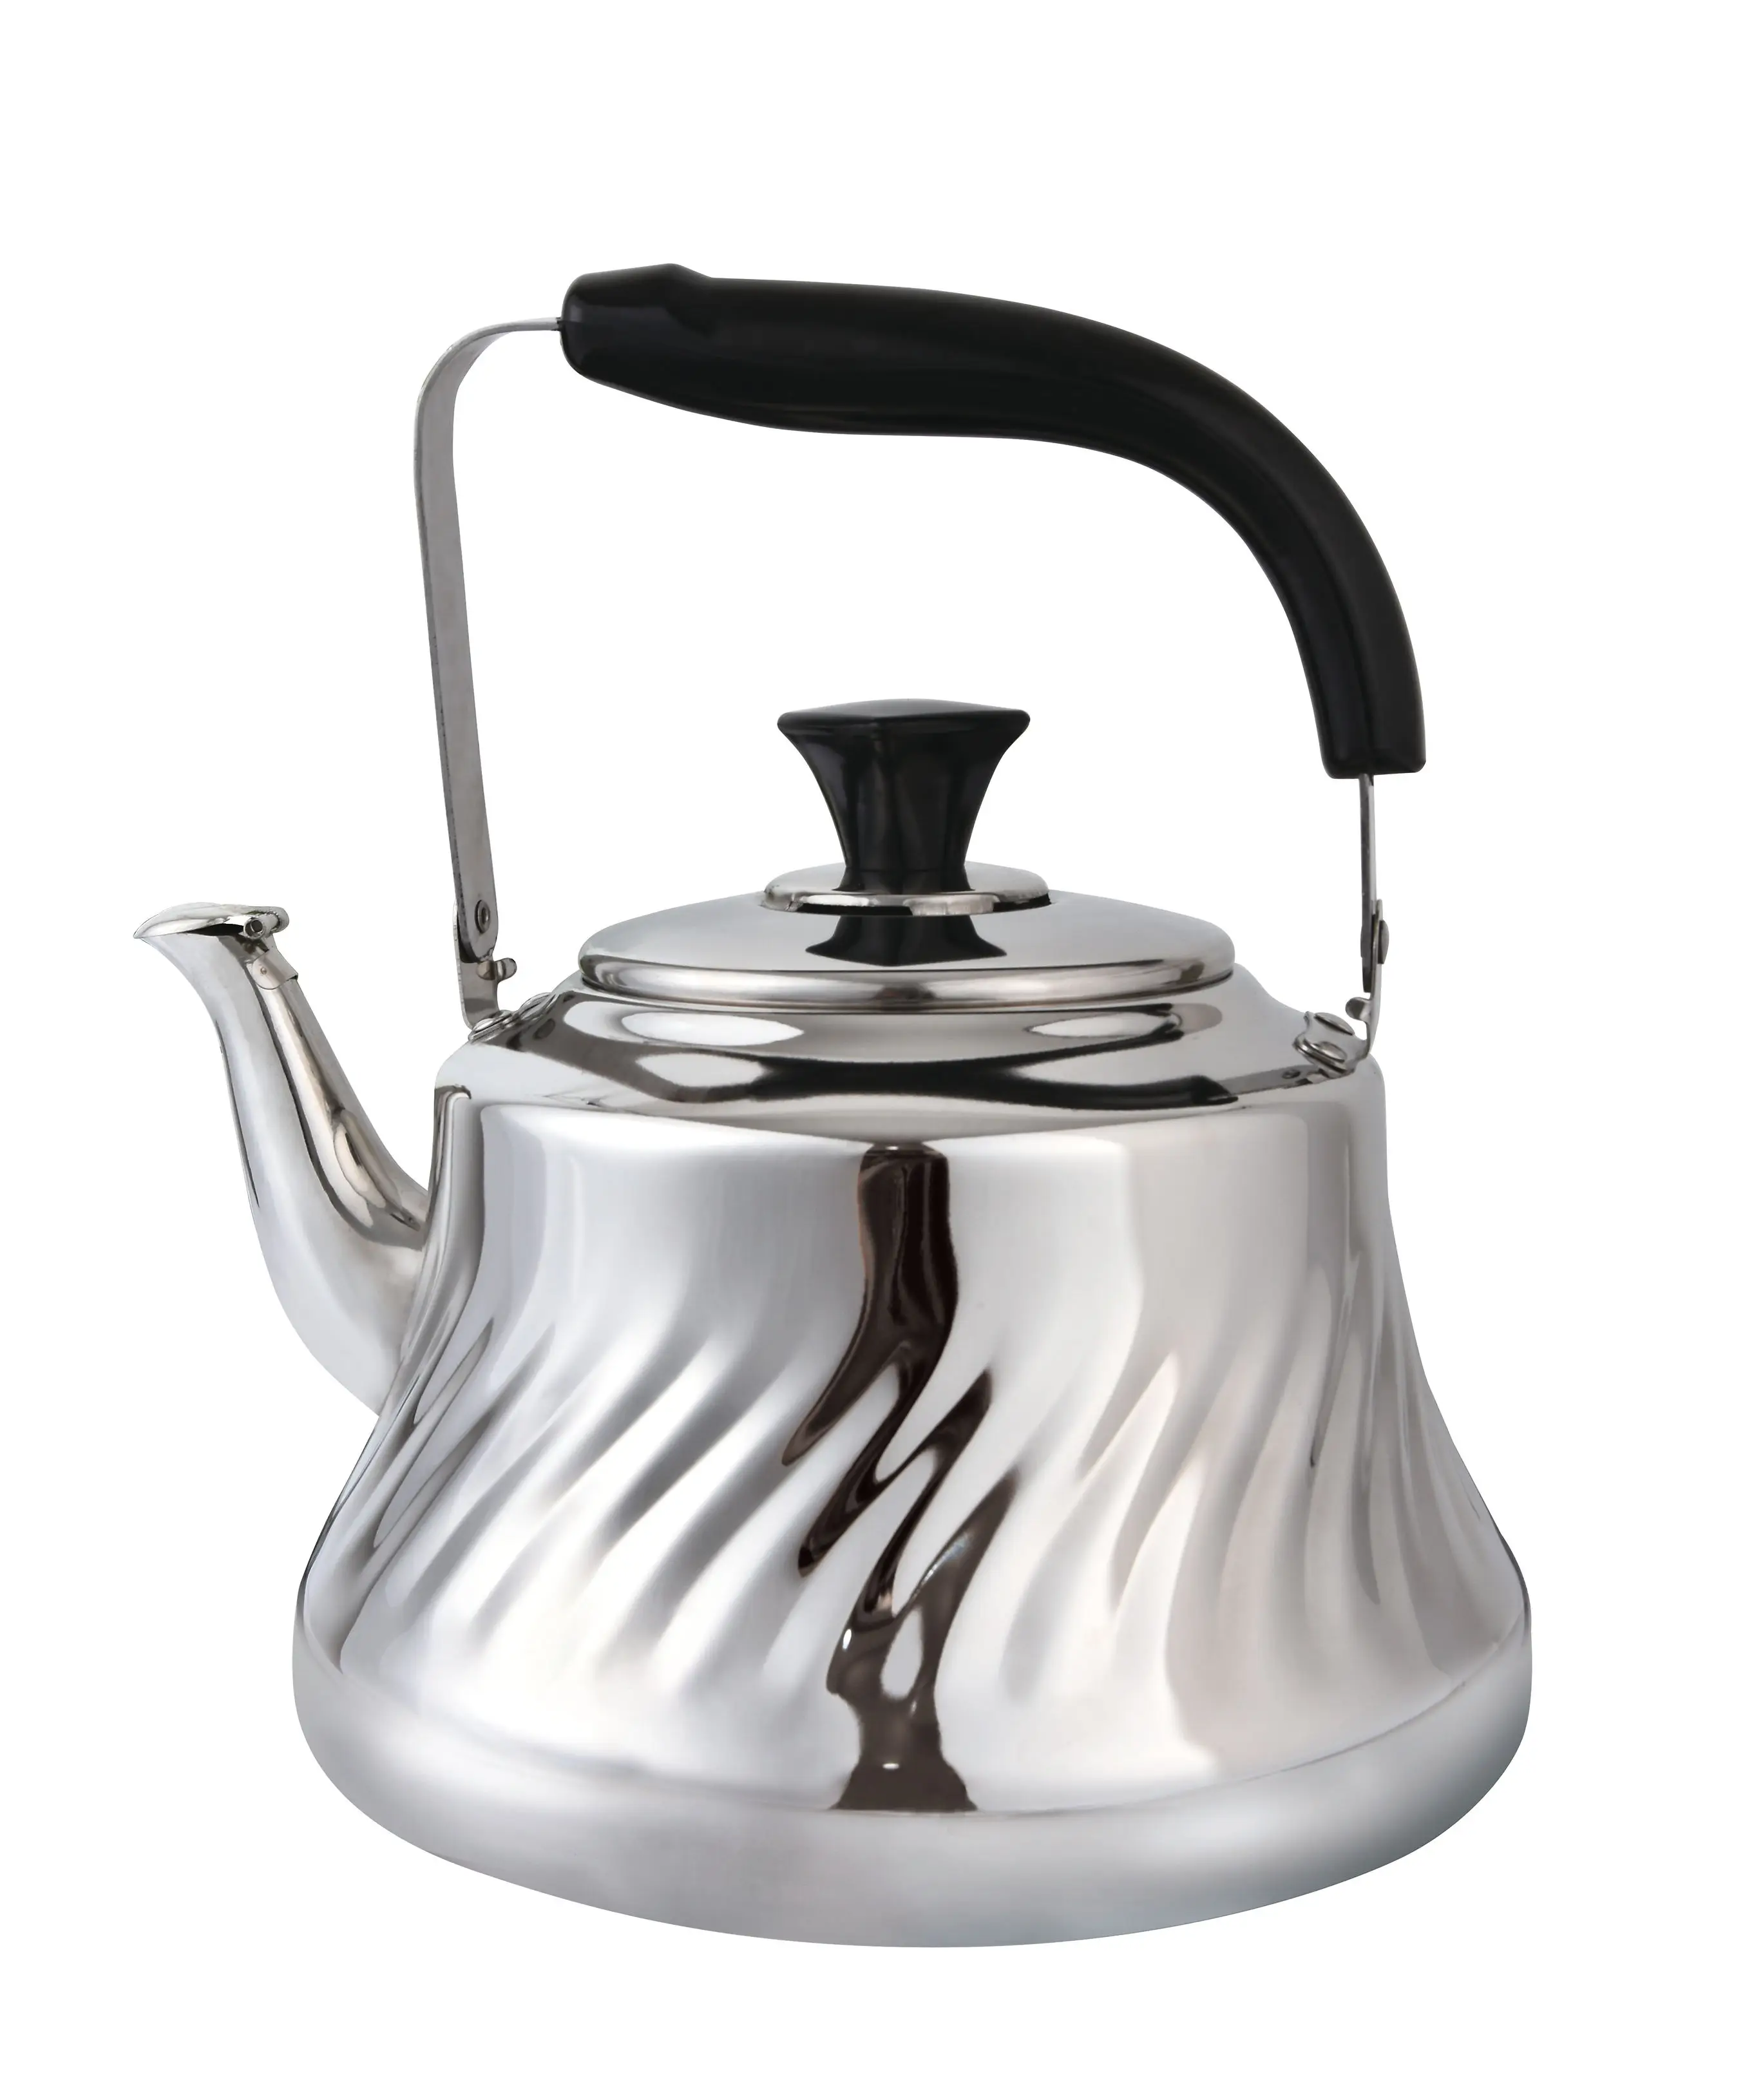  1L/1.5L Stainless Steel Water Kettle TeaPot Thicker With Filter  Hotel Tea Pot Coffee Pot Induction Cooker Tea Kettle Gold Silver (1L gold):  Home & Kitchen